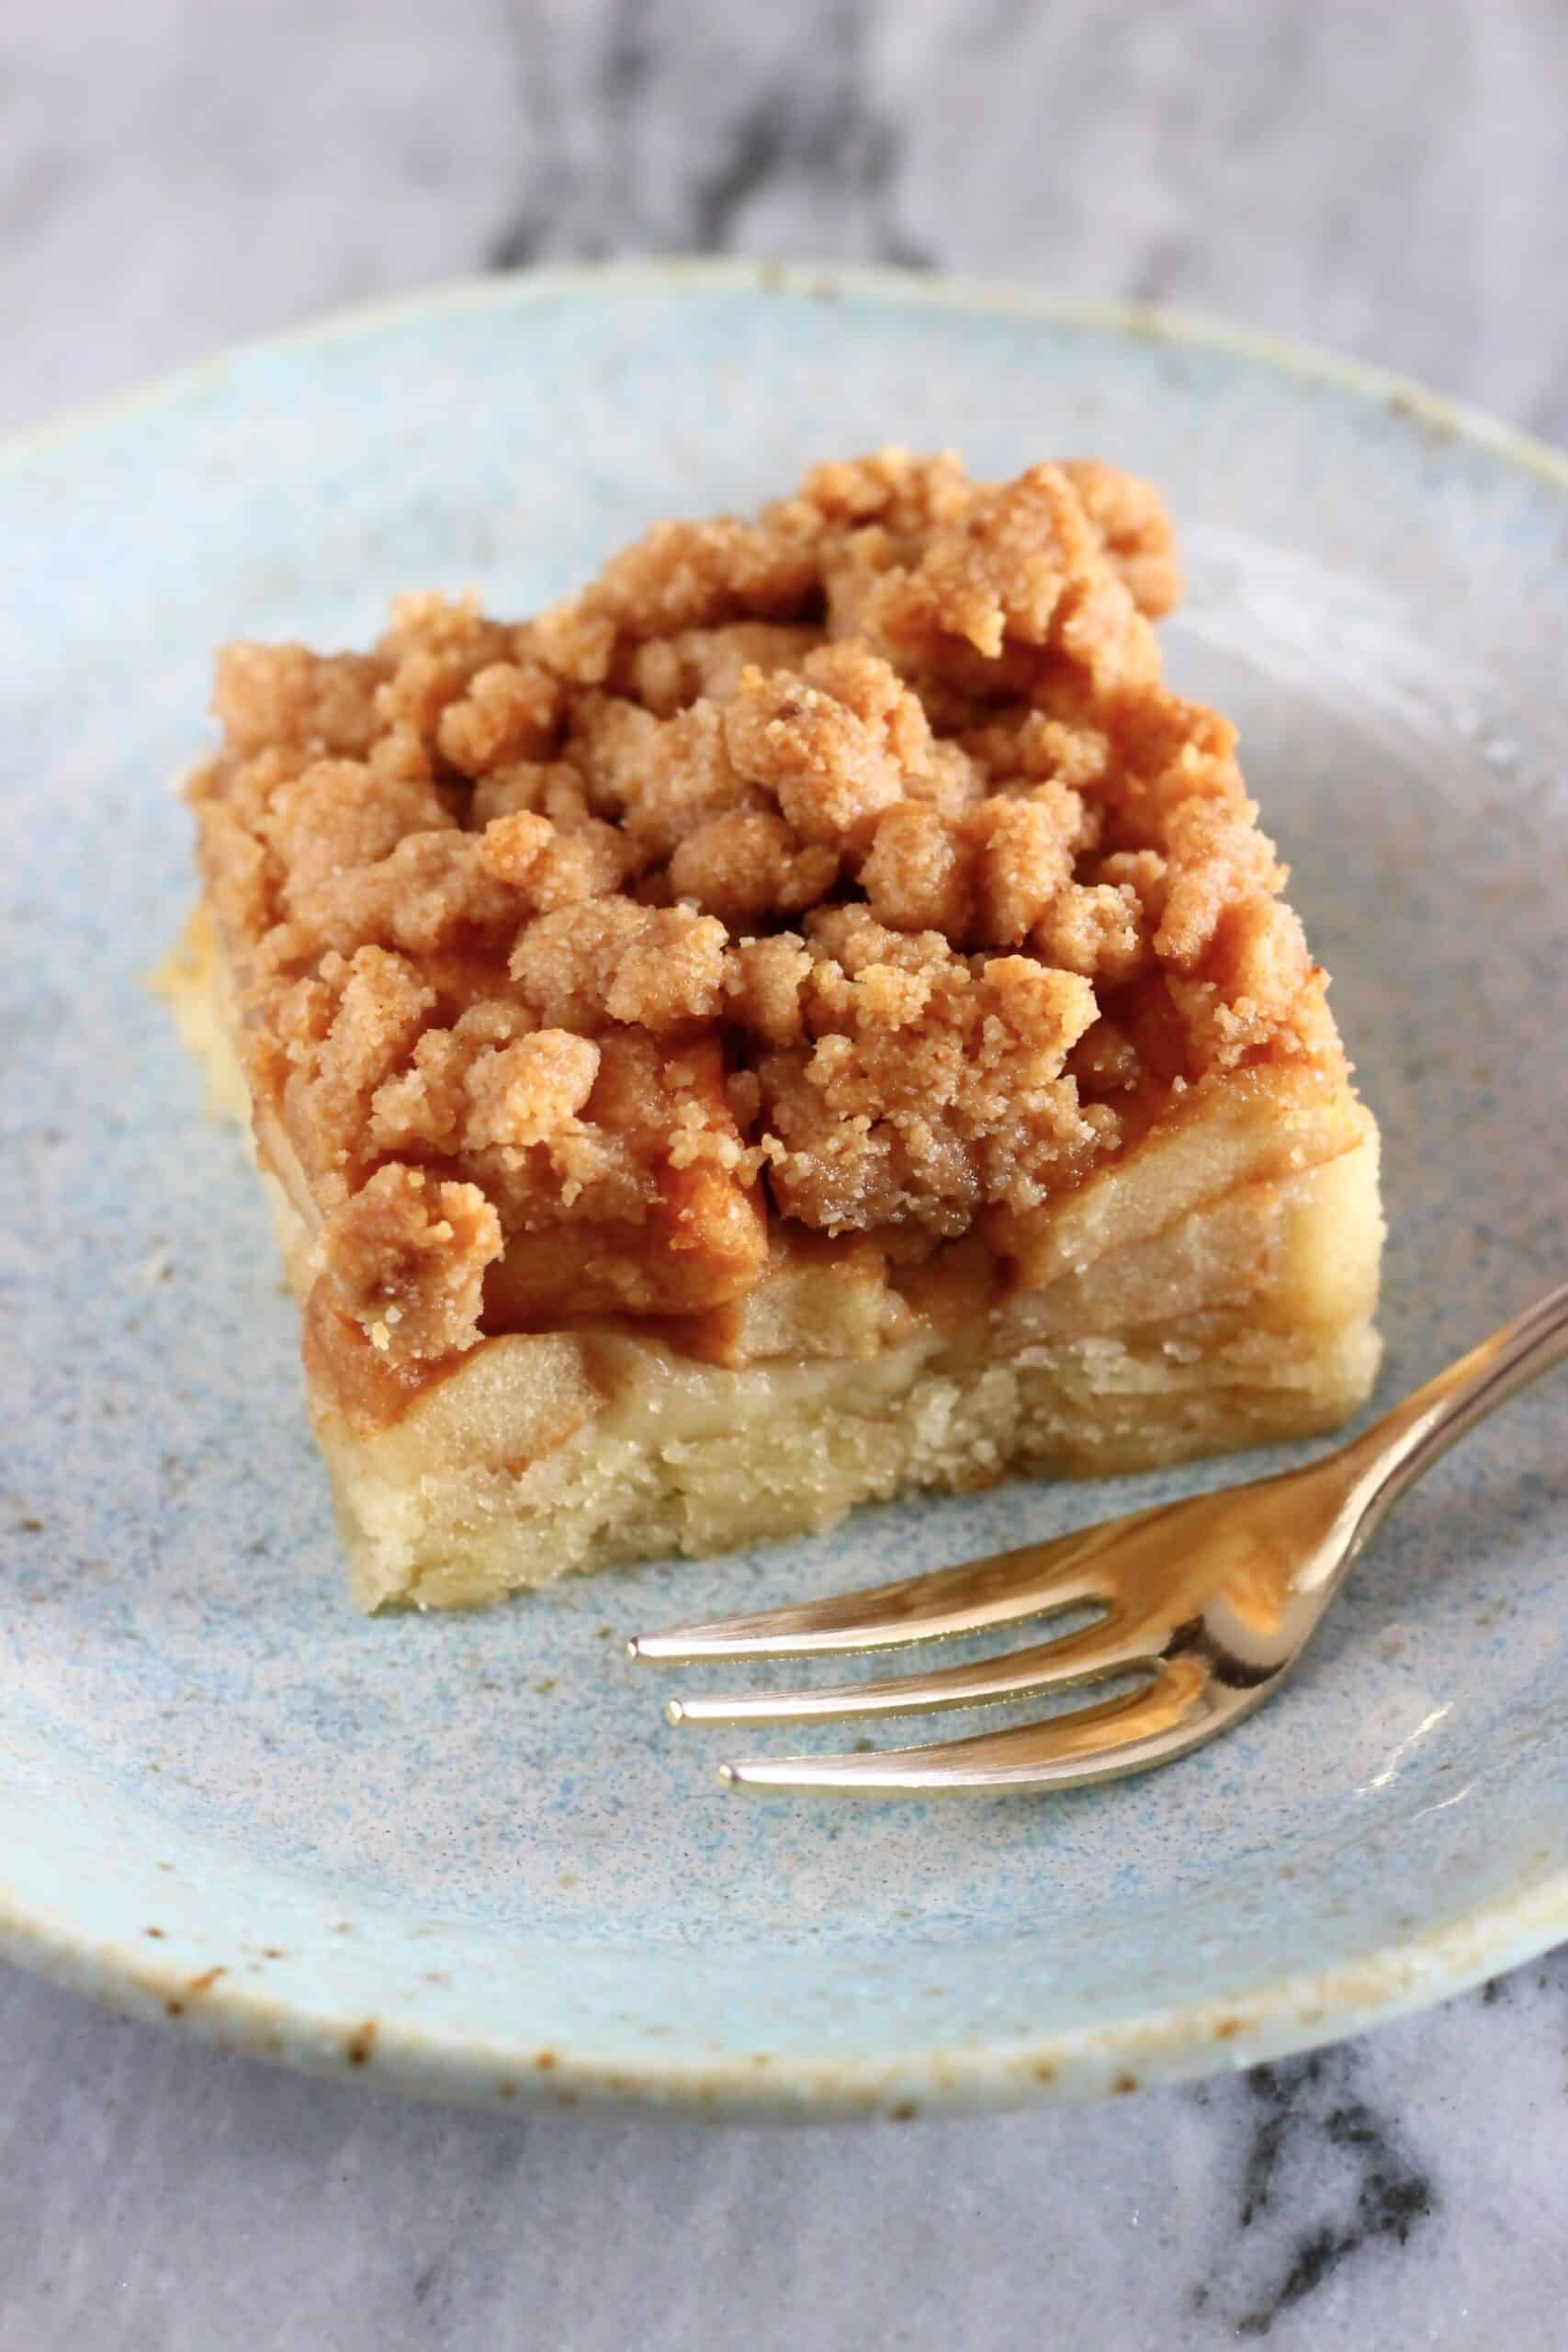 A square piece of vegan apple crumb cake on a plate with a gold fork